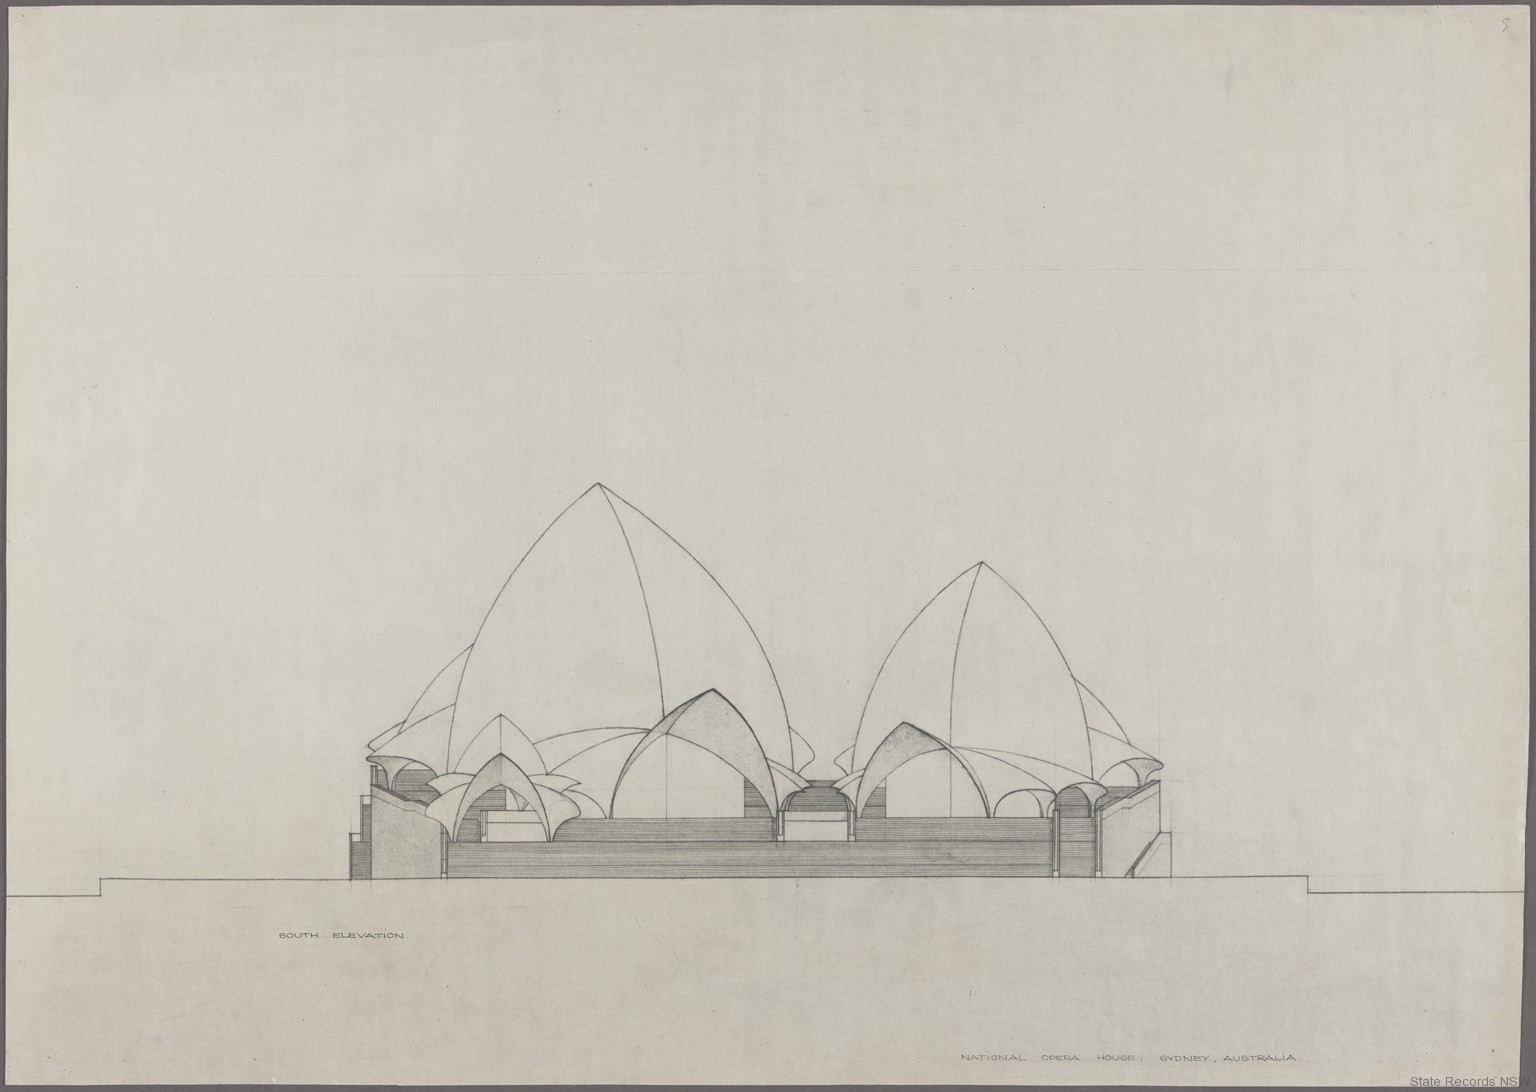 Sydney Opera House Utzon Drawings State Records NSW